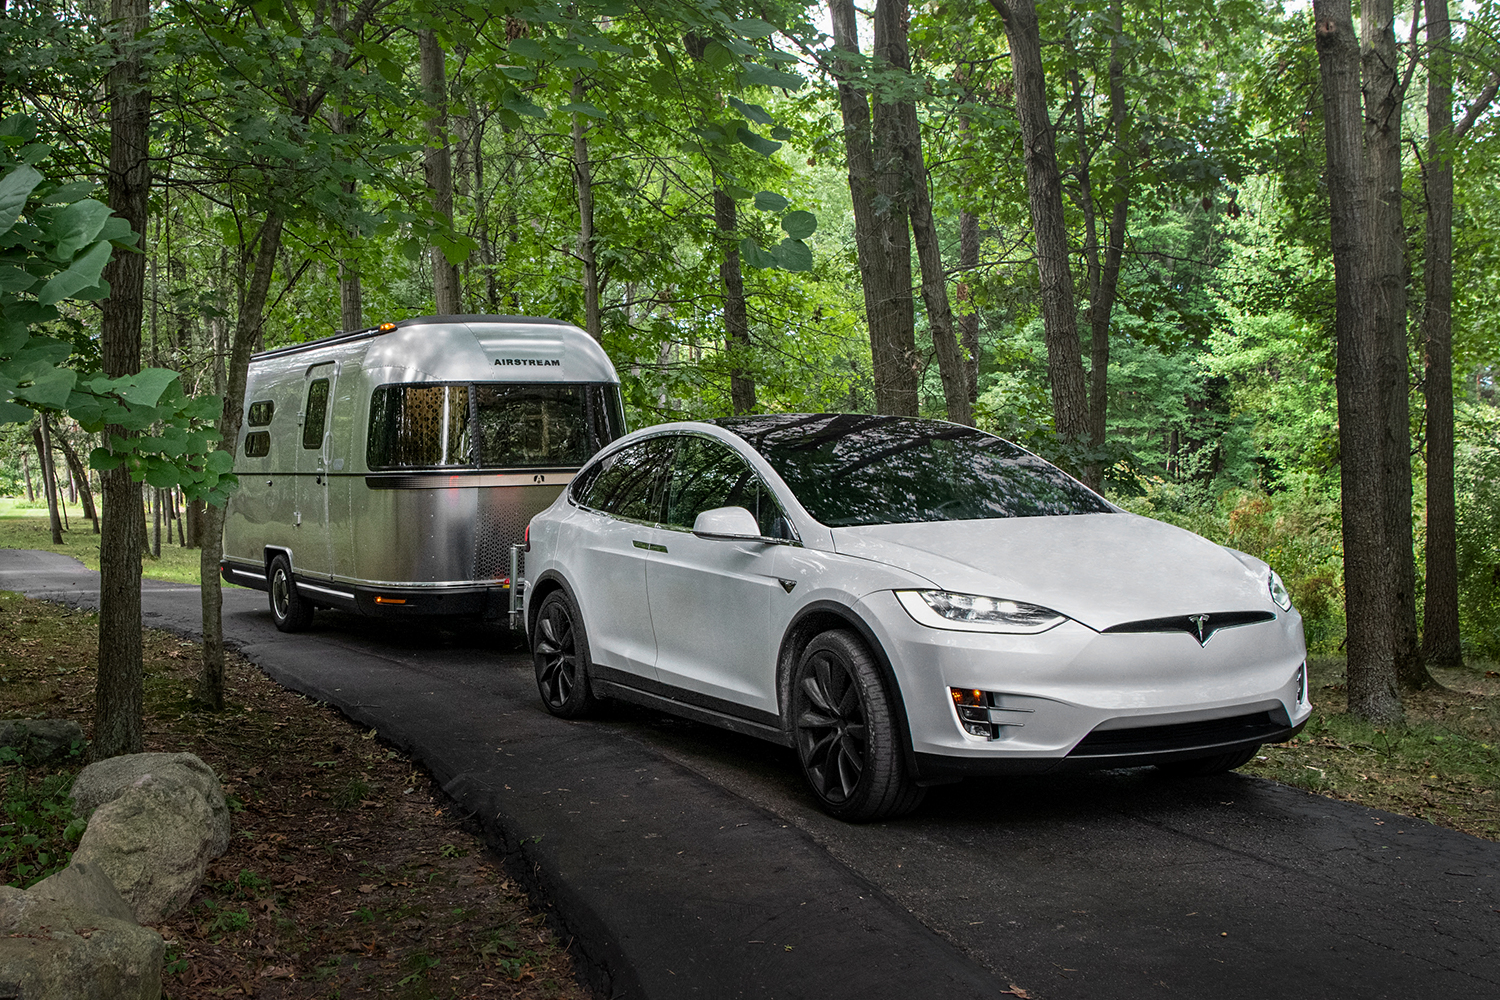 The Airstream eStream electric concept silver bullet trailer being towed by a Tesla. The electric drivetrain helps alleviate the load on the EV and thus conserve energy.